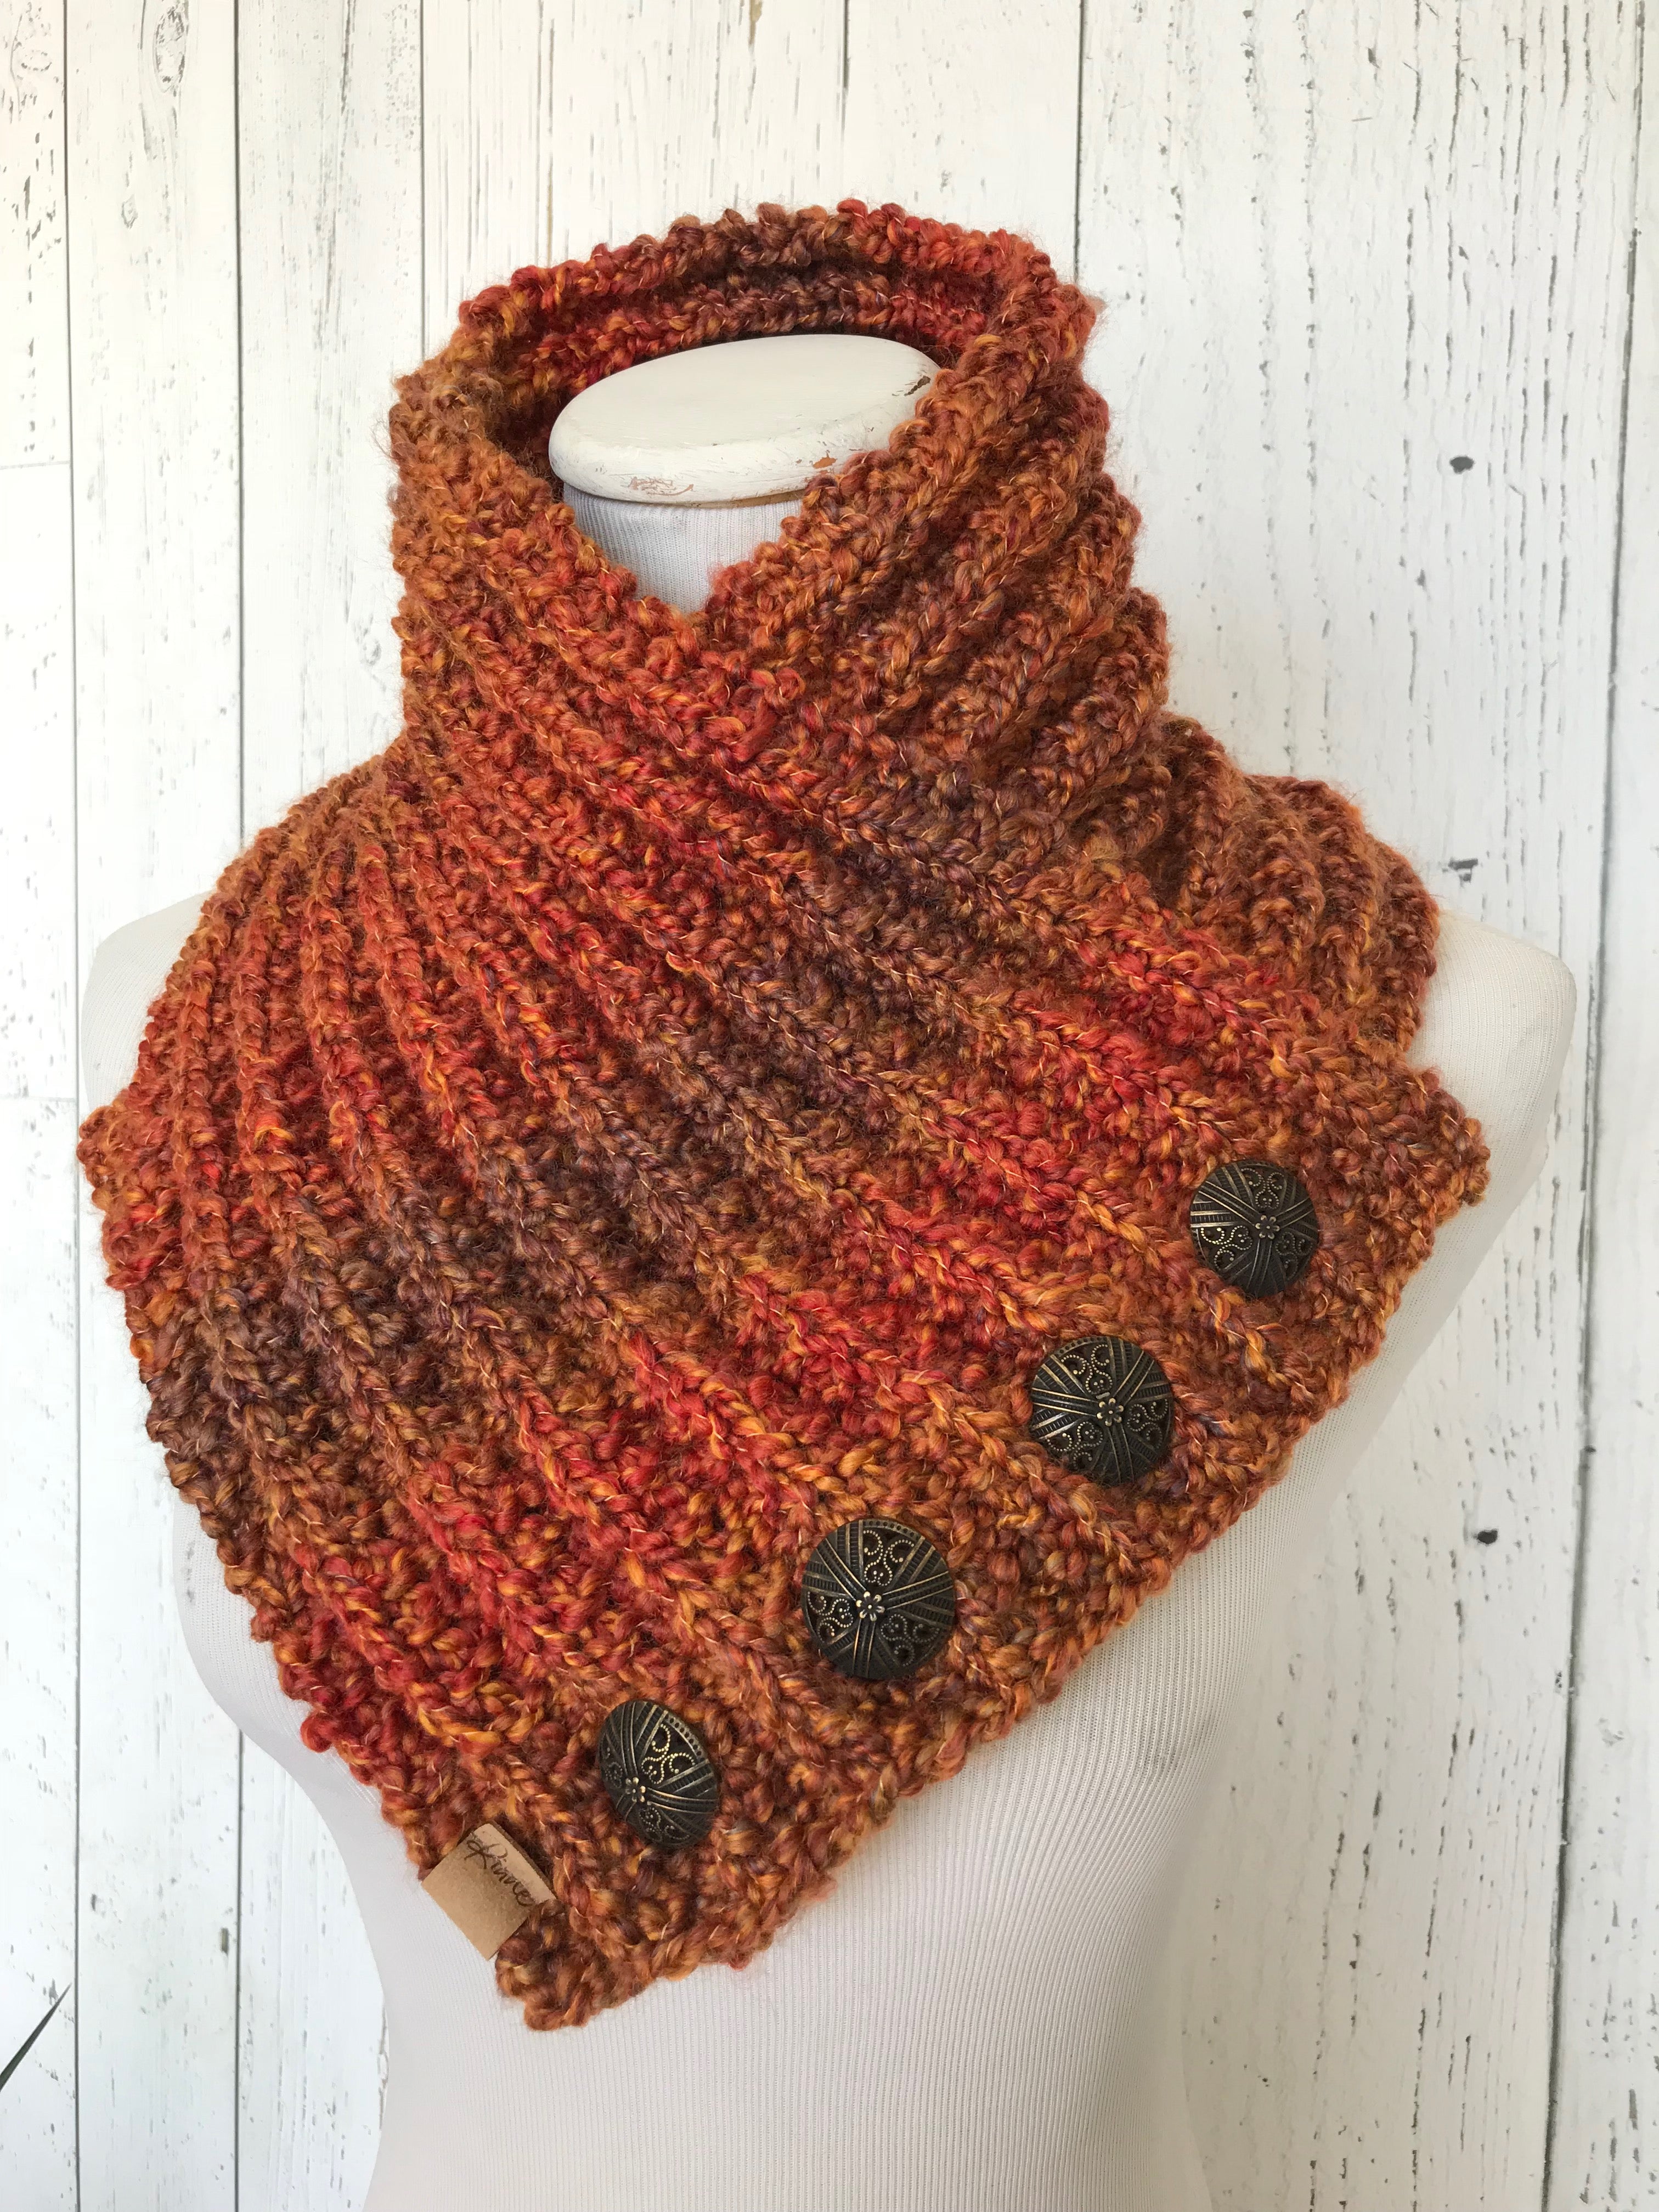 Classic Knit Button Cowl in prairie fire, oranges with bronze buttons